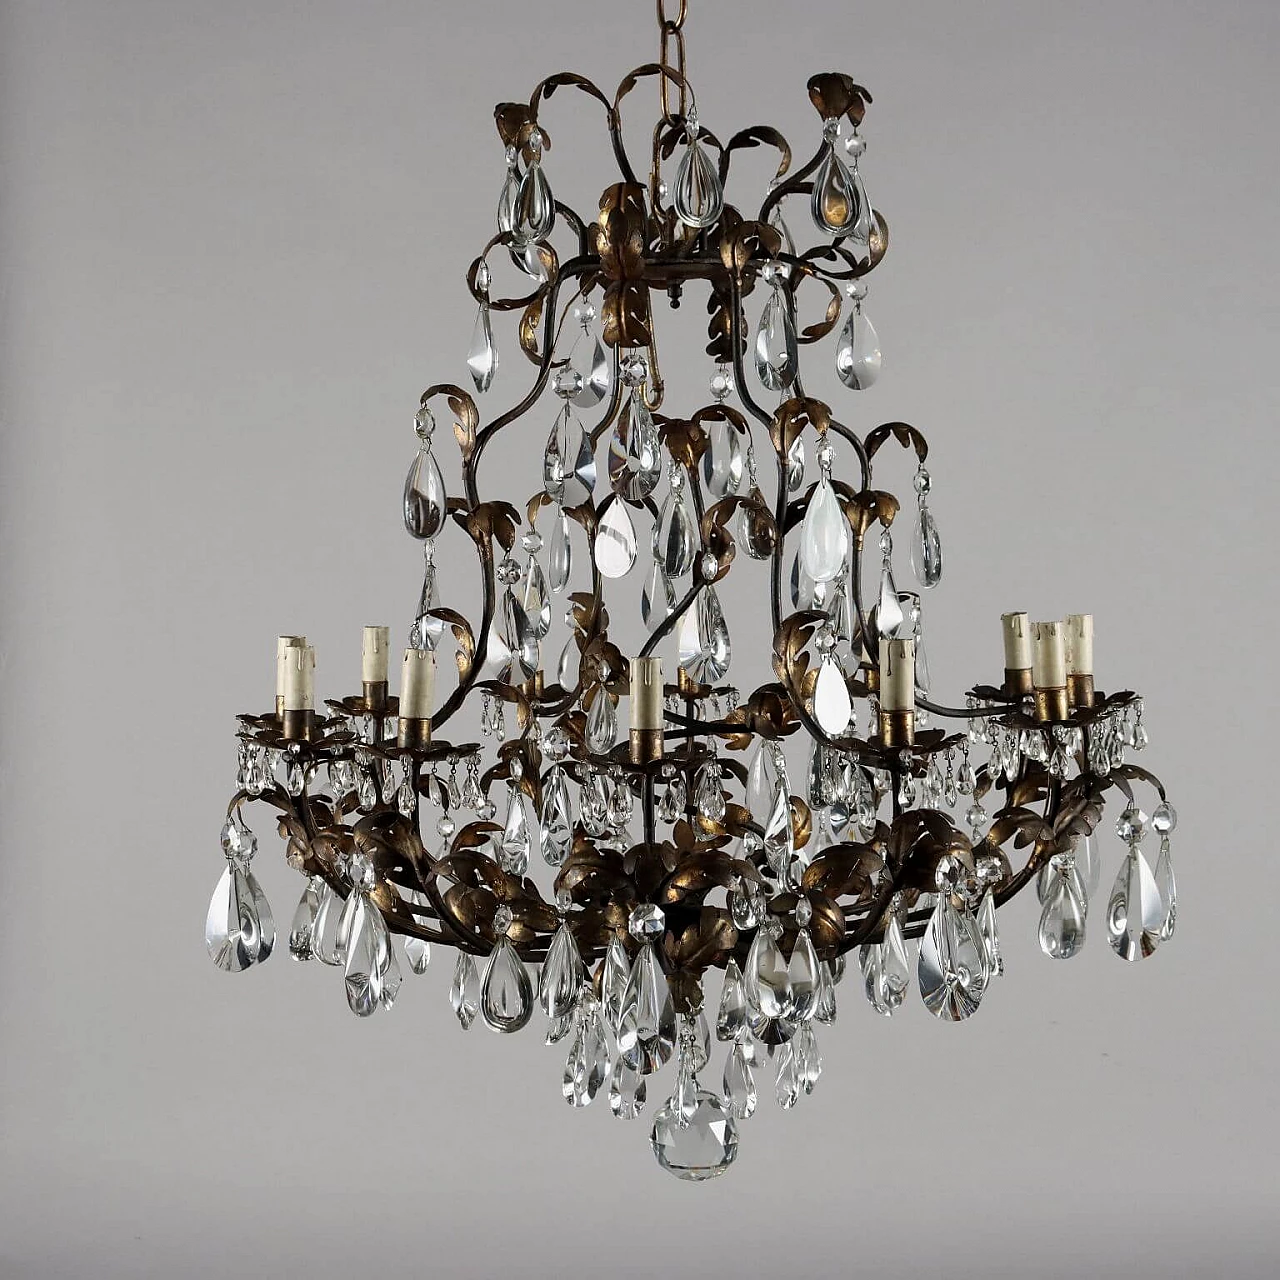 12-light chandelier made of sheet metal and glass pendants 3